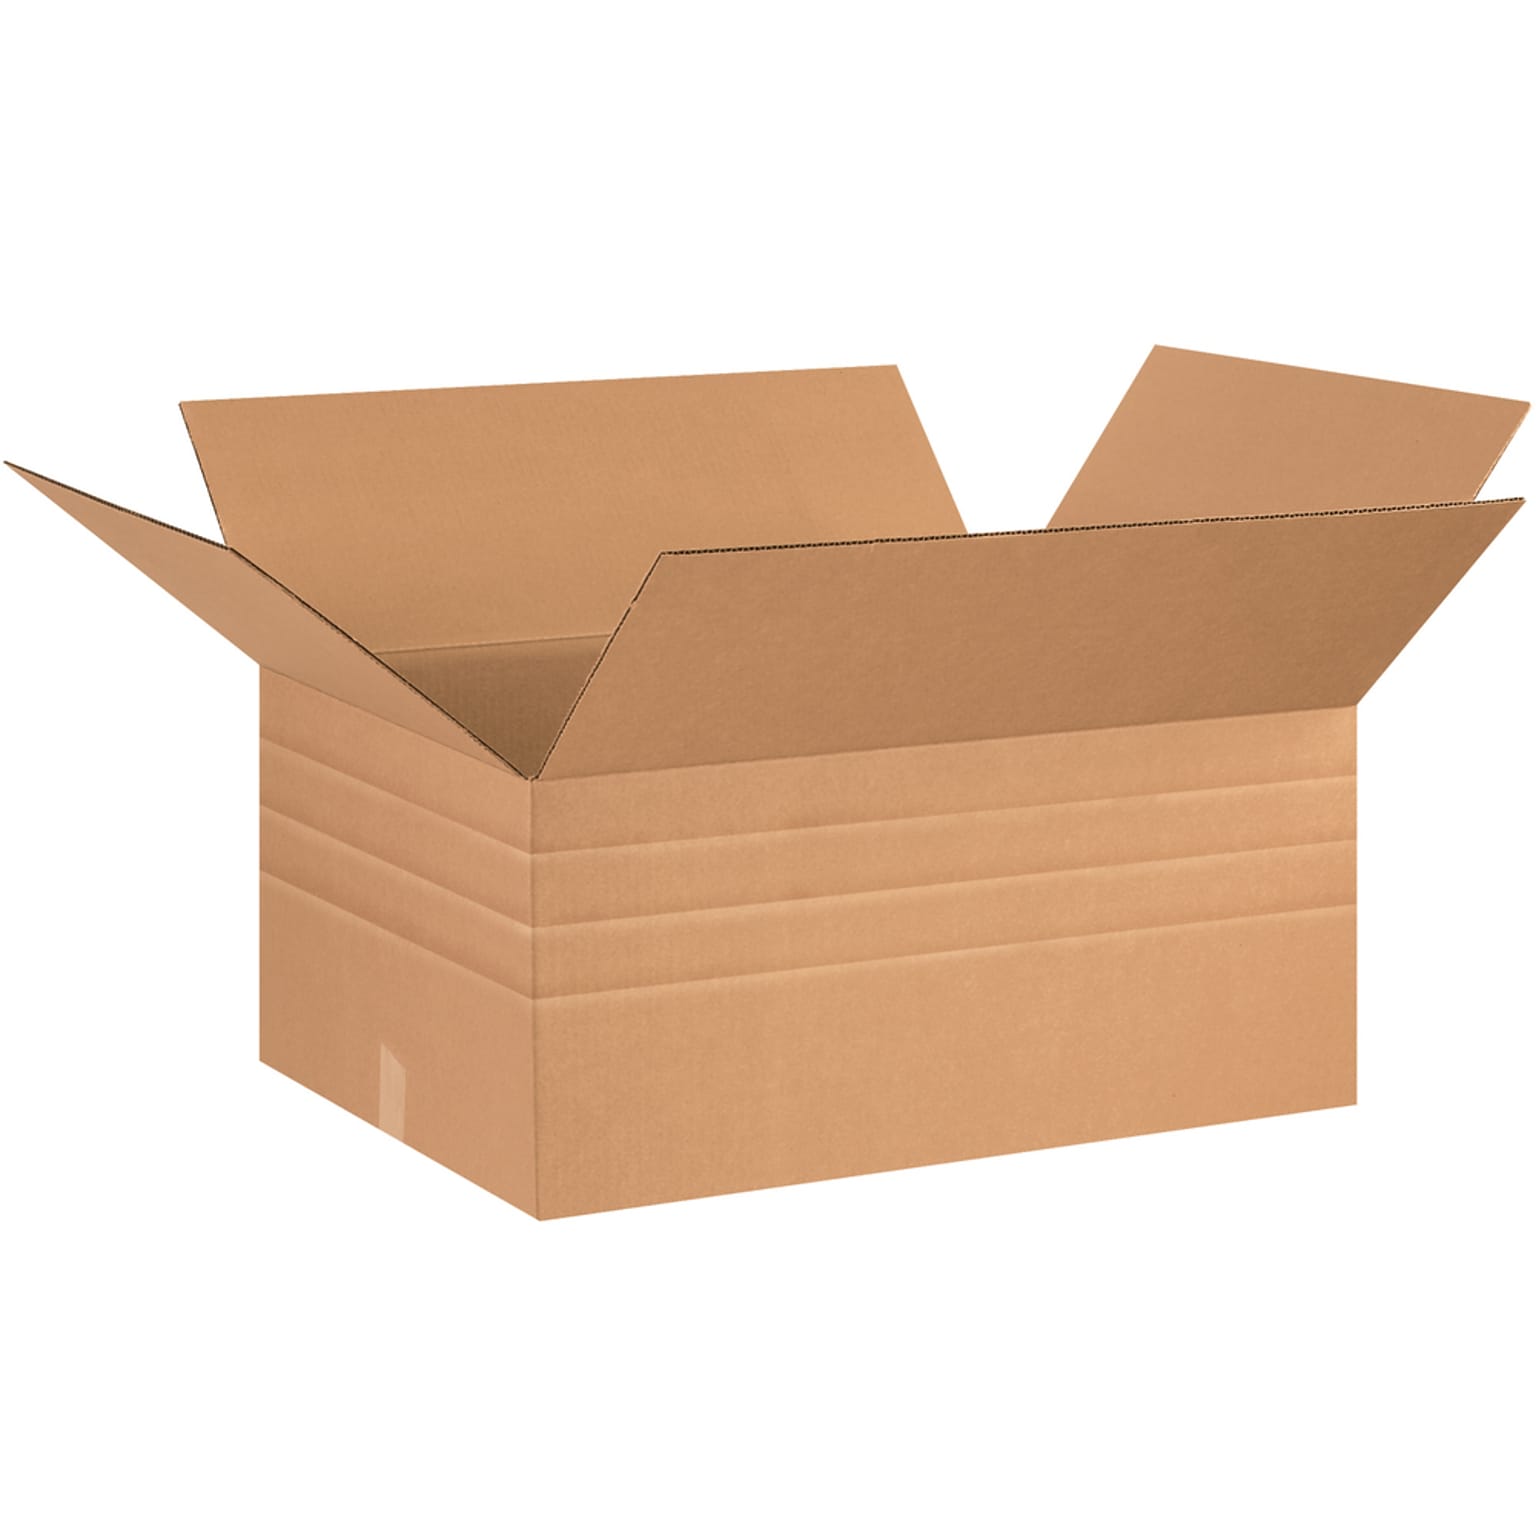 SI Products 26 x 20 x 12 Multi-Depth Shipping Boxes, 200#/ECT-32 Mullen Rated Corrugated, Pack of 10, (MD262012)